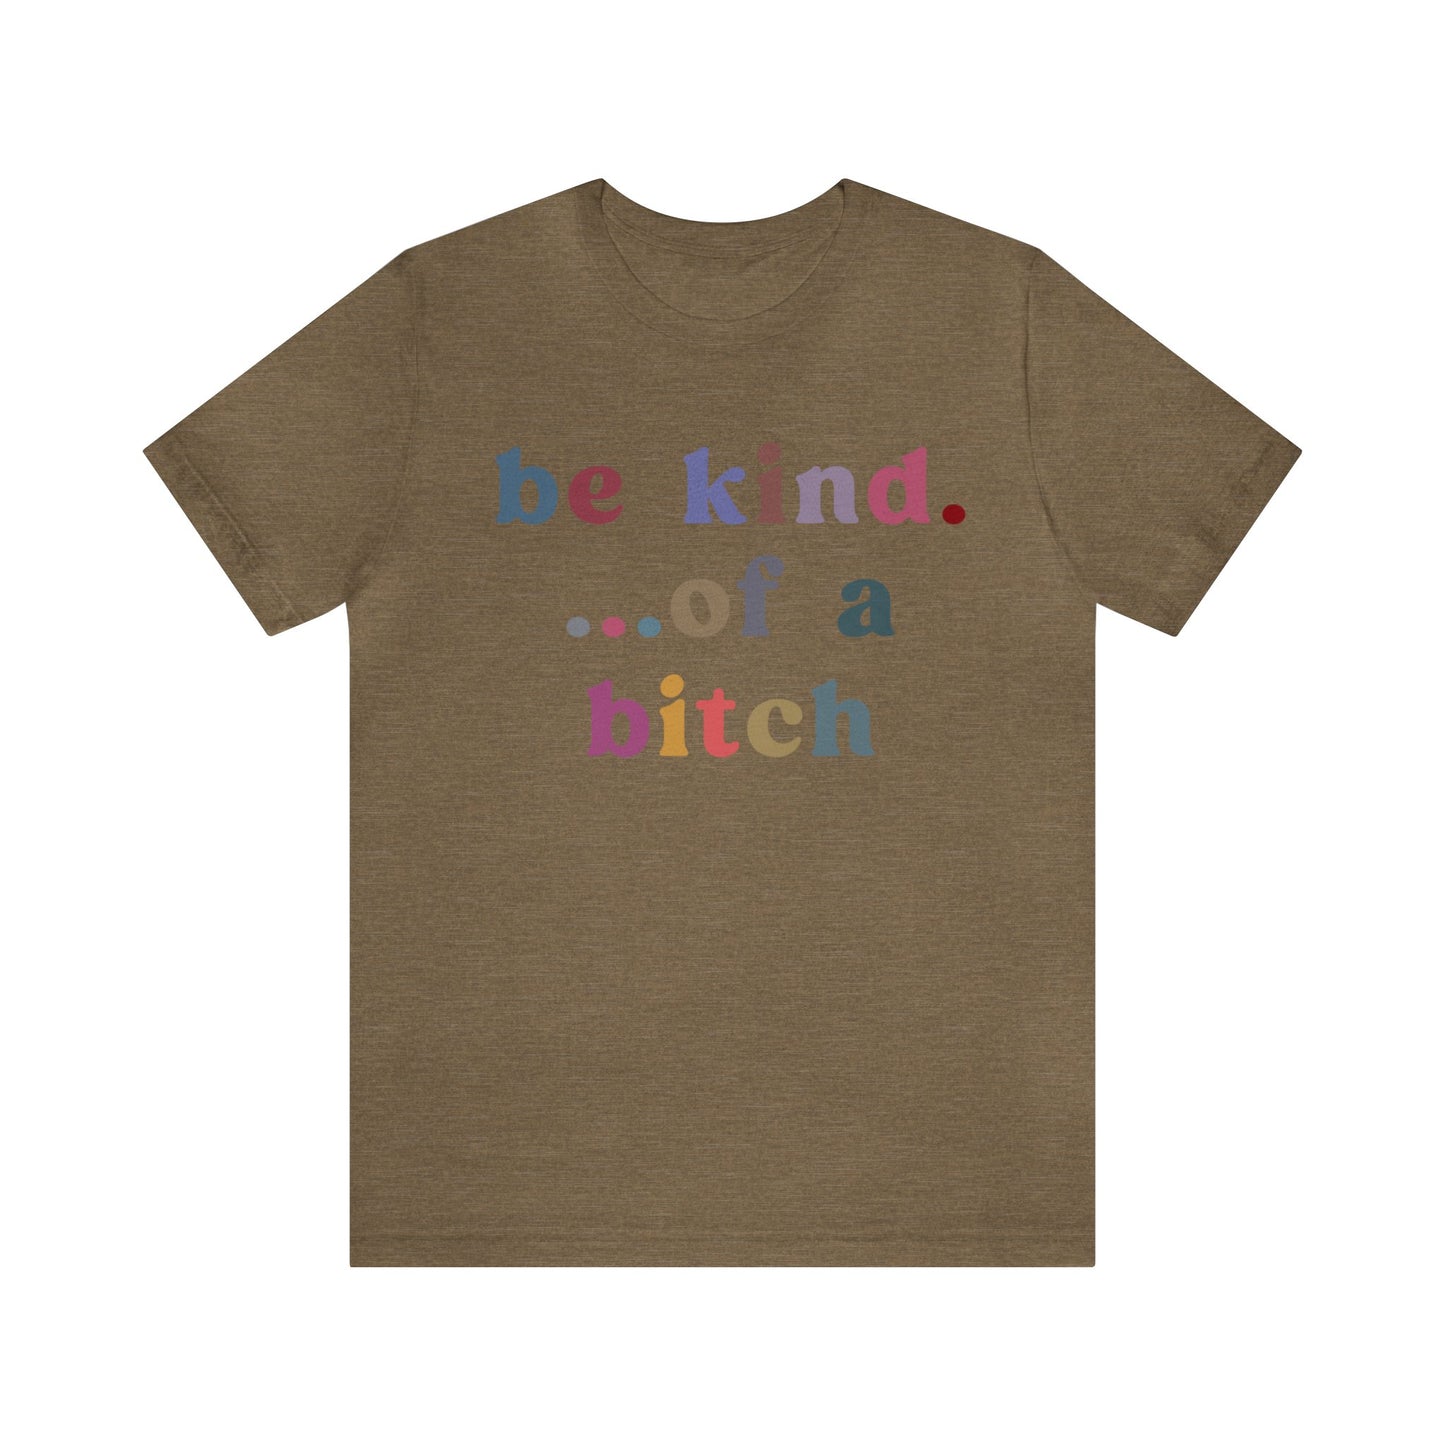 Be Kind Of A Bitch Shirt, Funny Girls Shirt, Funny Sassy Shirt, Sarcasm Shirt for Women, Funny Gift for Friends, Gift For Girls, T1199